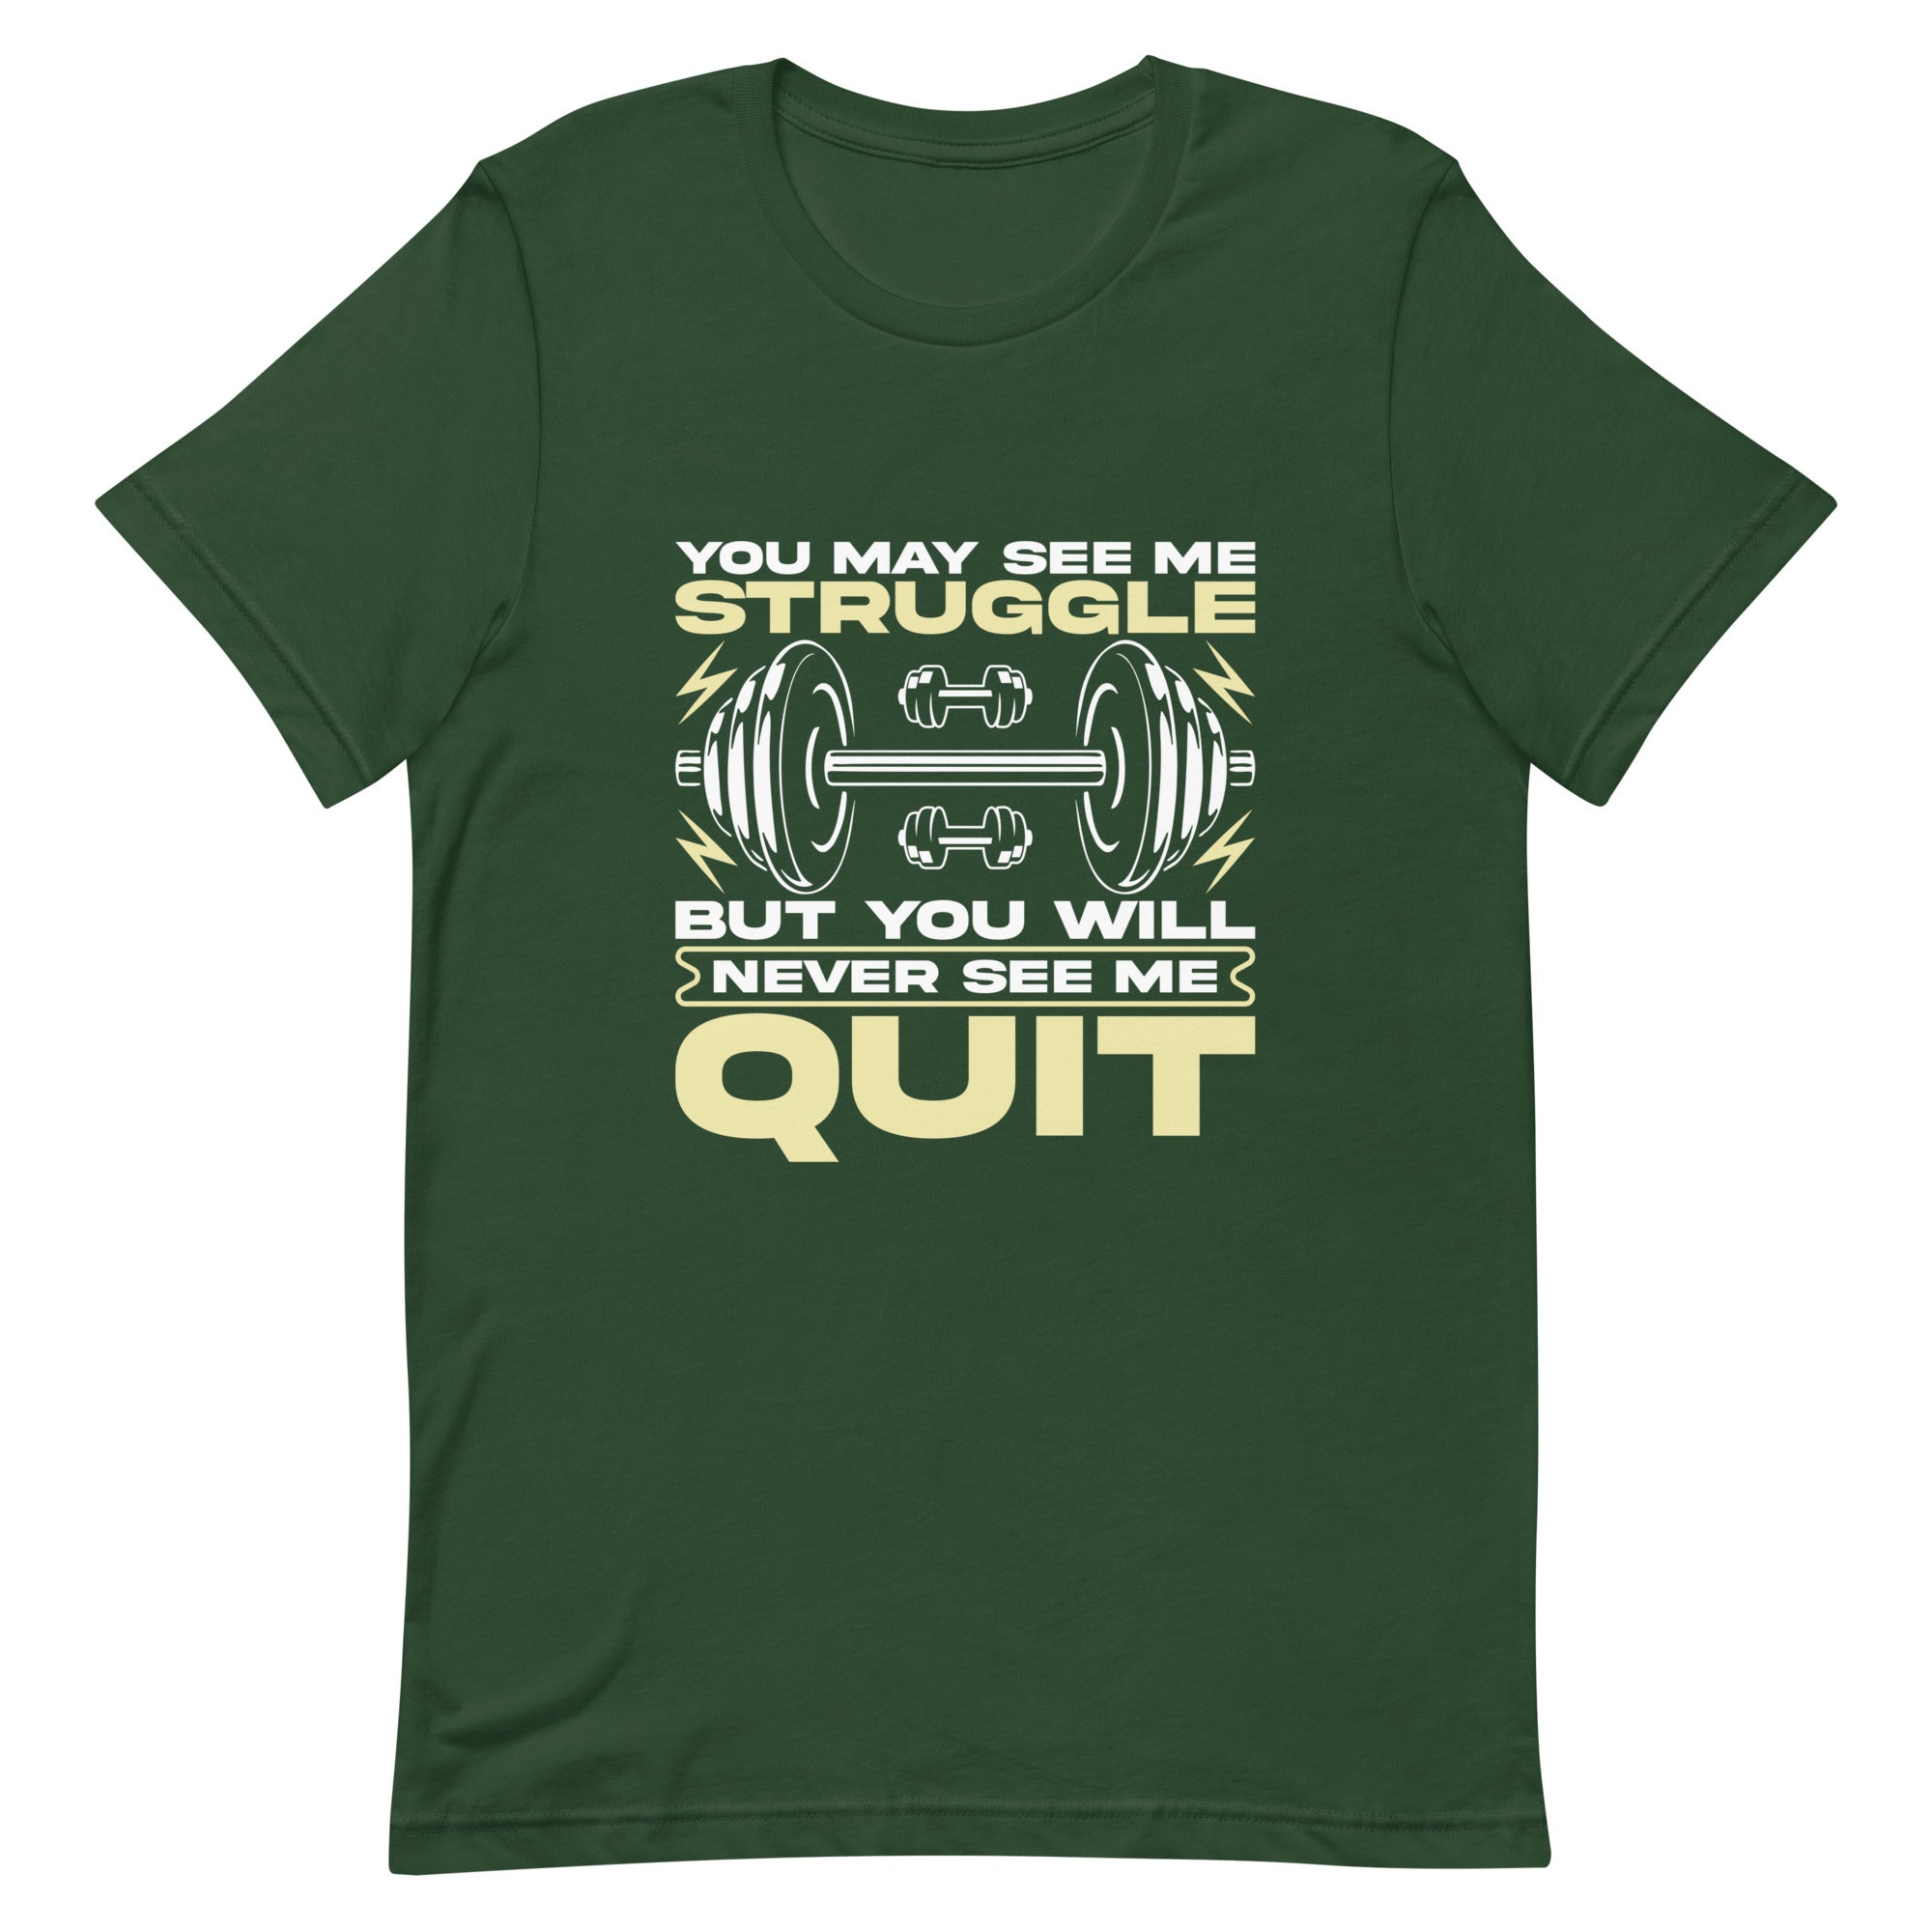 You May See The Struggle But You Will Never See Me Quit Gym Training Fitness Workout Motivational Quote Men's T-Shirt